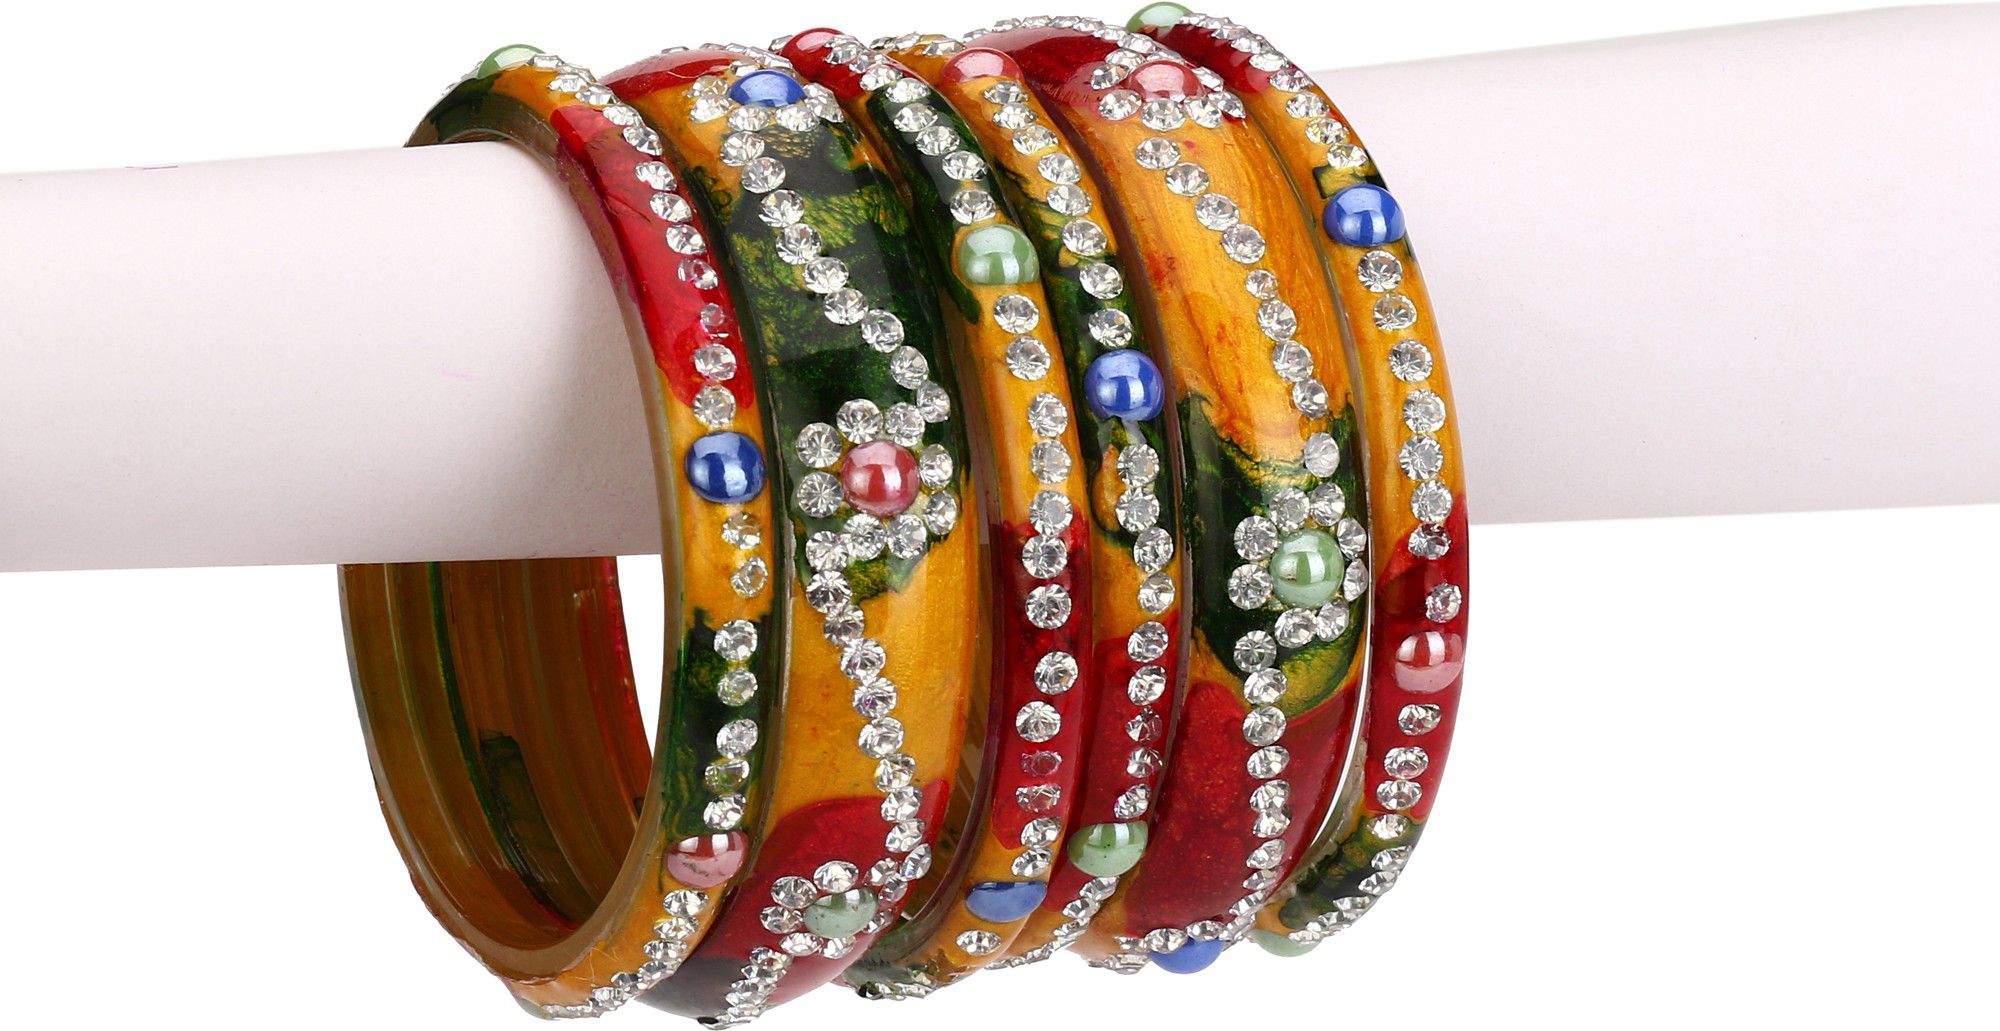     			Somil Multi Color 2 & 4 Bangle Set decorative With Colorful Beads & Stones With Safety Box-DM_2.2